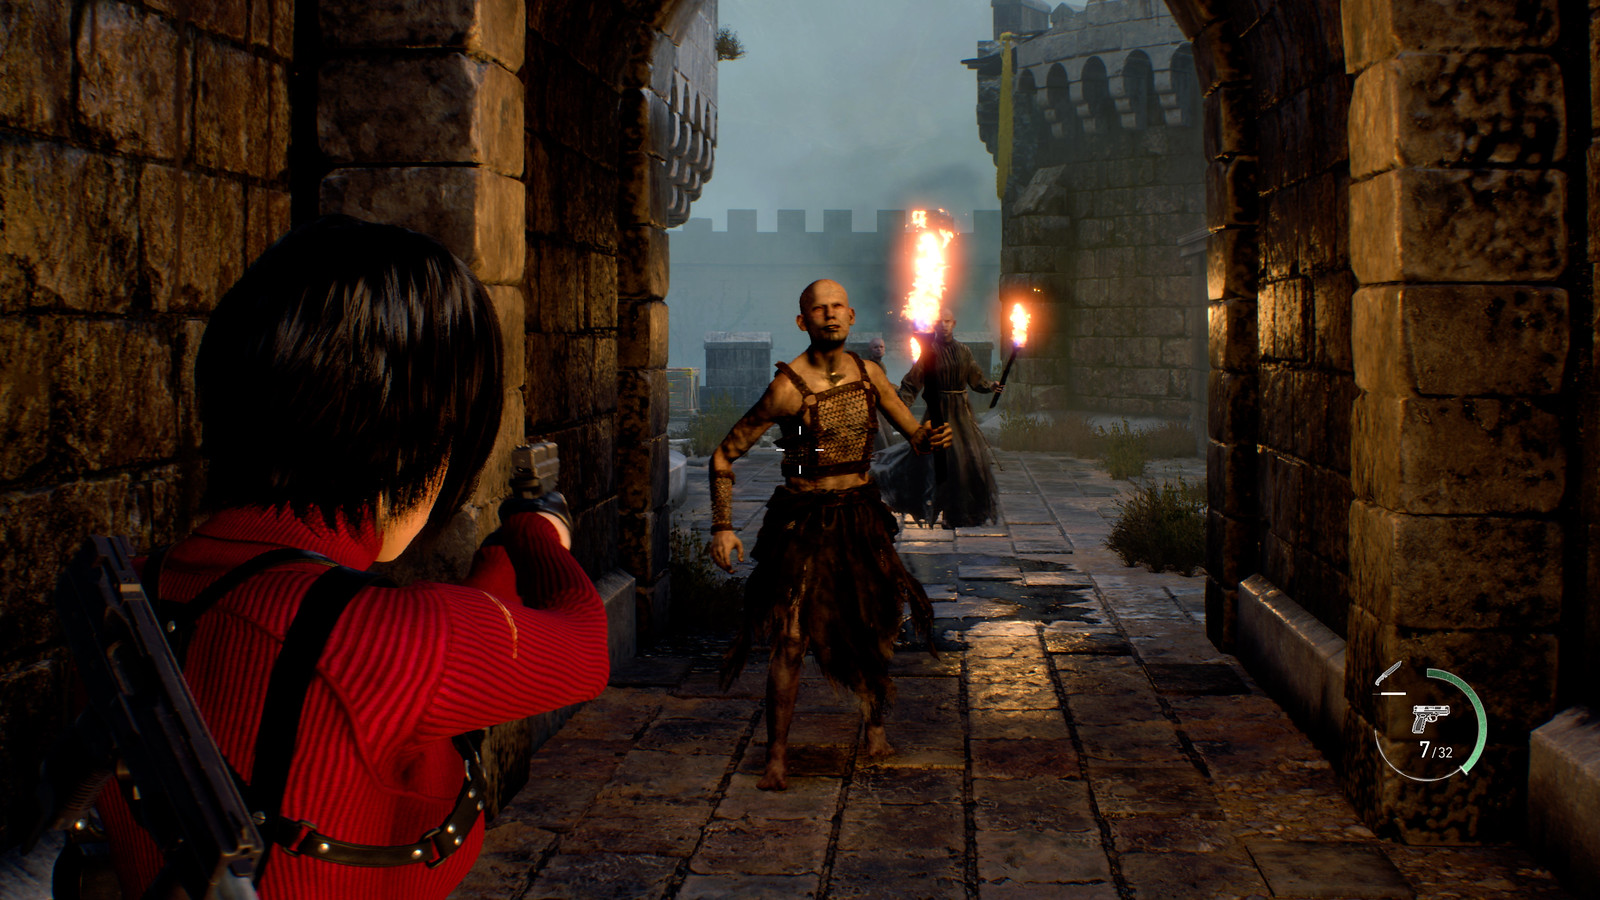 Ada Wong readies her handgun at a torch-carrying enemy as the two stand underneath a castle’s exterior archway corridor.